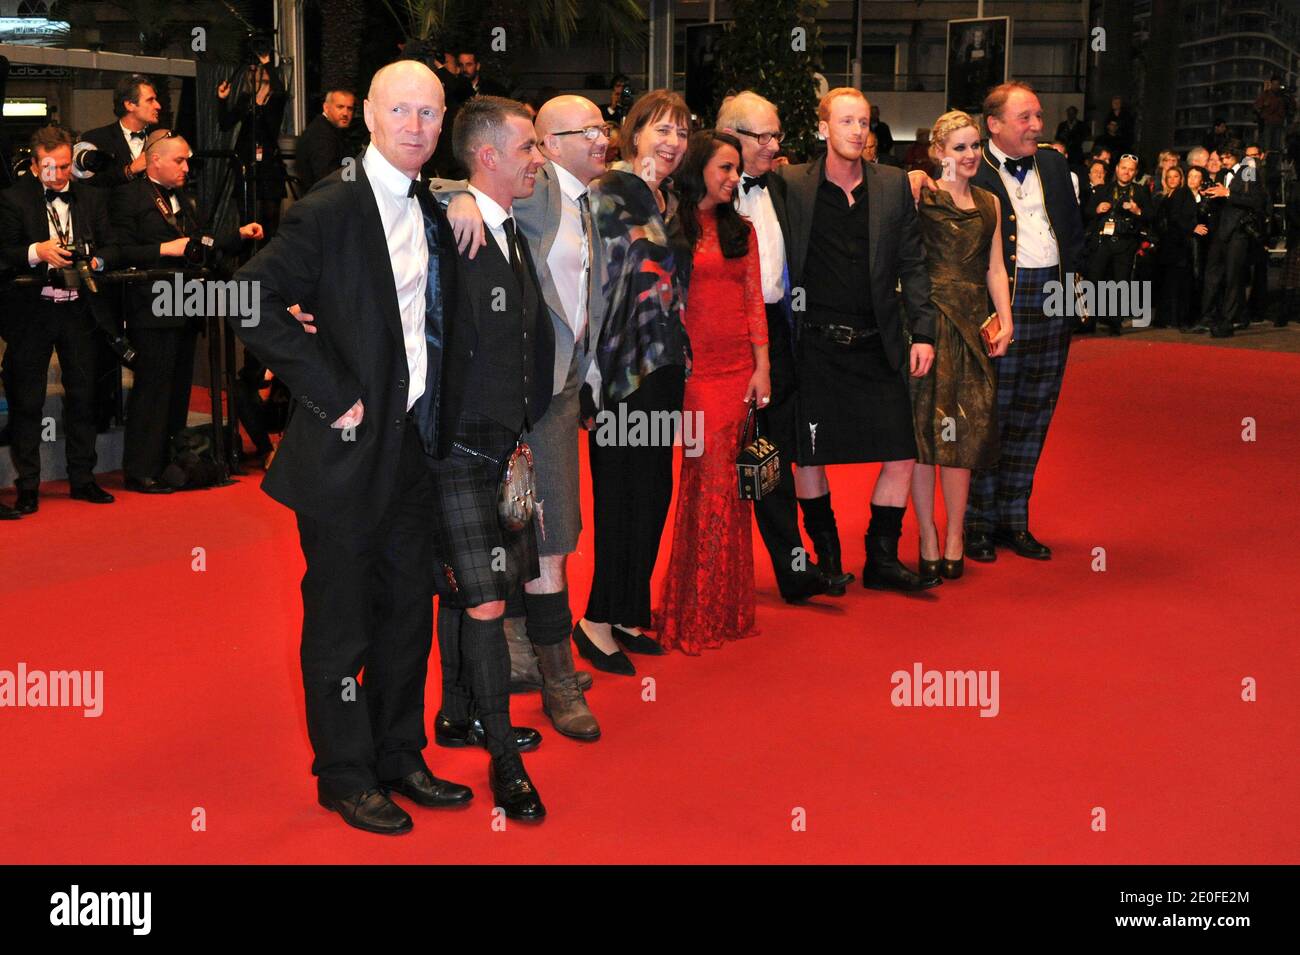 Charlie Maclean, Siobhan Reilly, William Ruane, Ken Loach, Jasmin Riggins, Gary Maitland and Paul Brannigan arriving at The Angels Share premiere at the 65th Cannes film festival, in Cannes, southern France, on May 22, 2012. Photo by Aurore Marechal/ABACAPRESS.COM Stock Photo